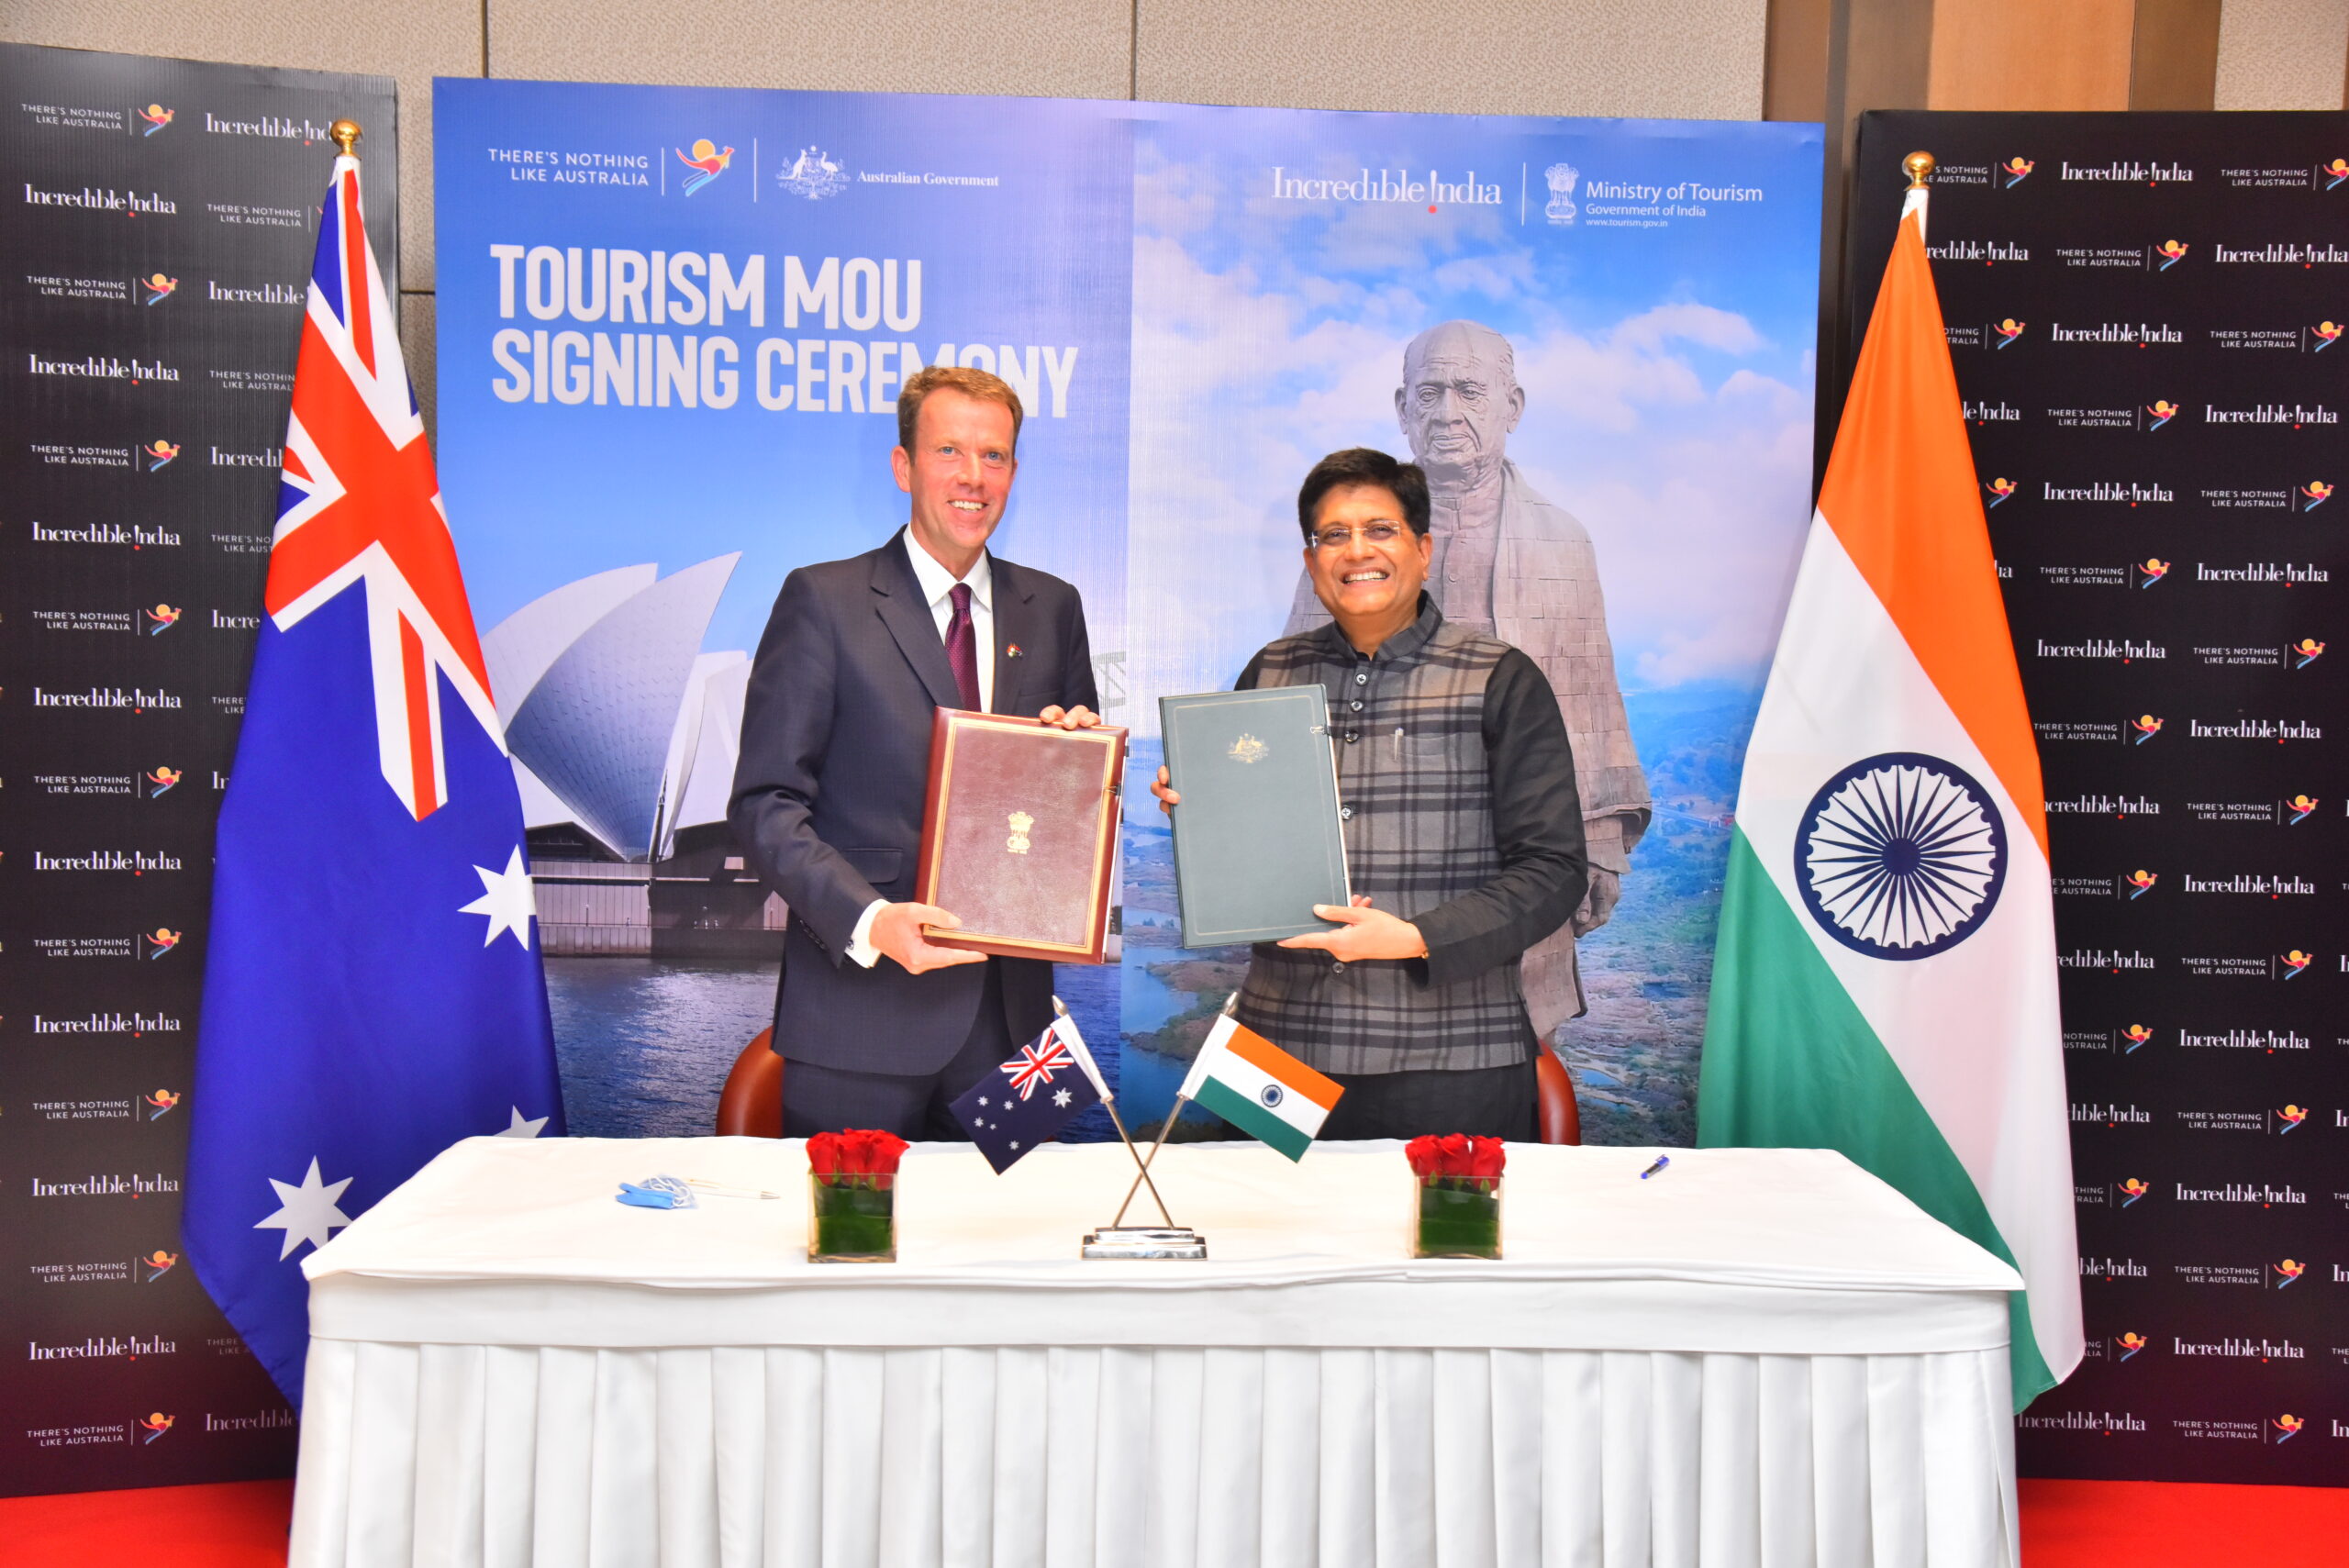 Australia to strengthen economic and tourism ties with India